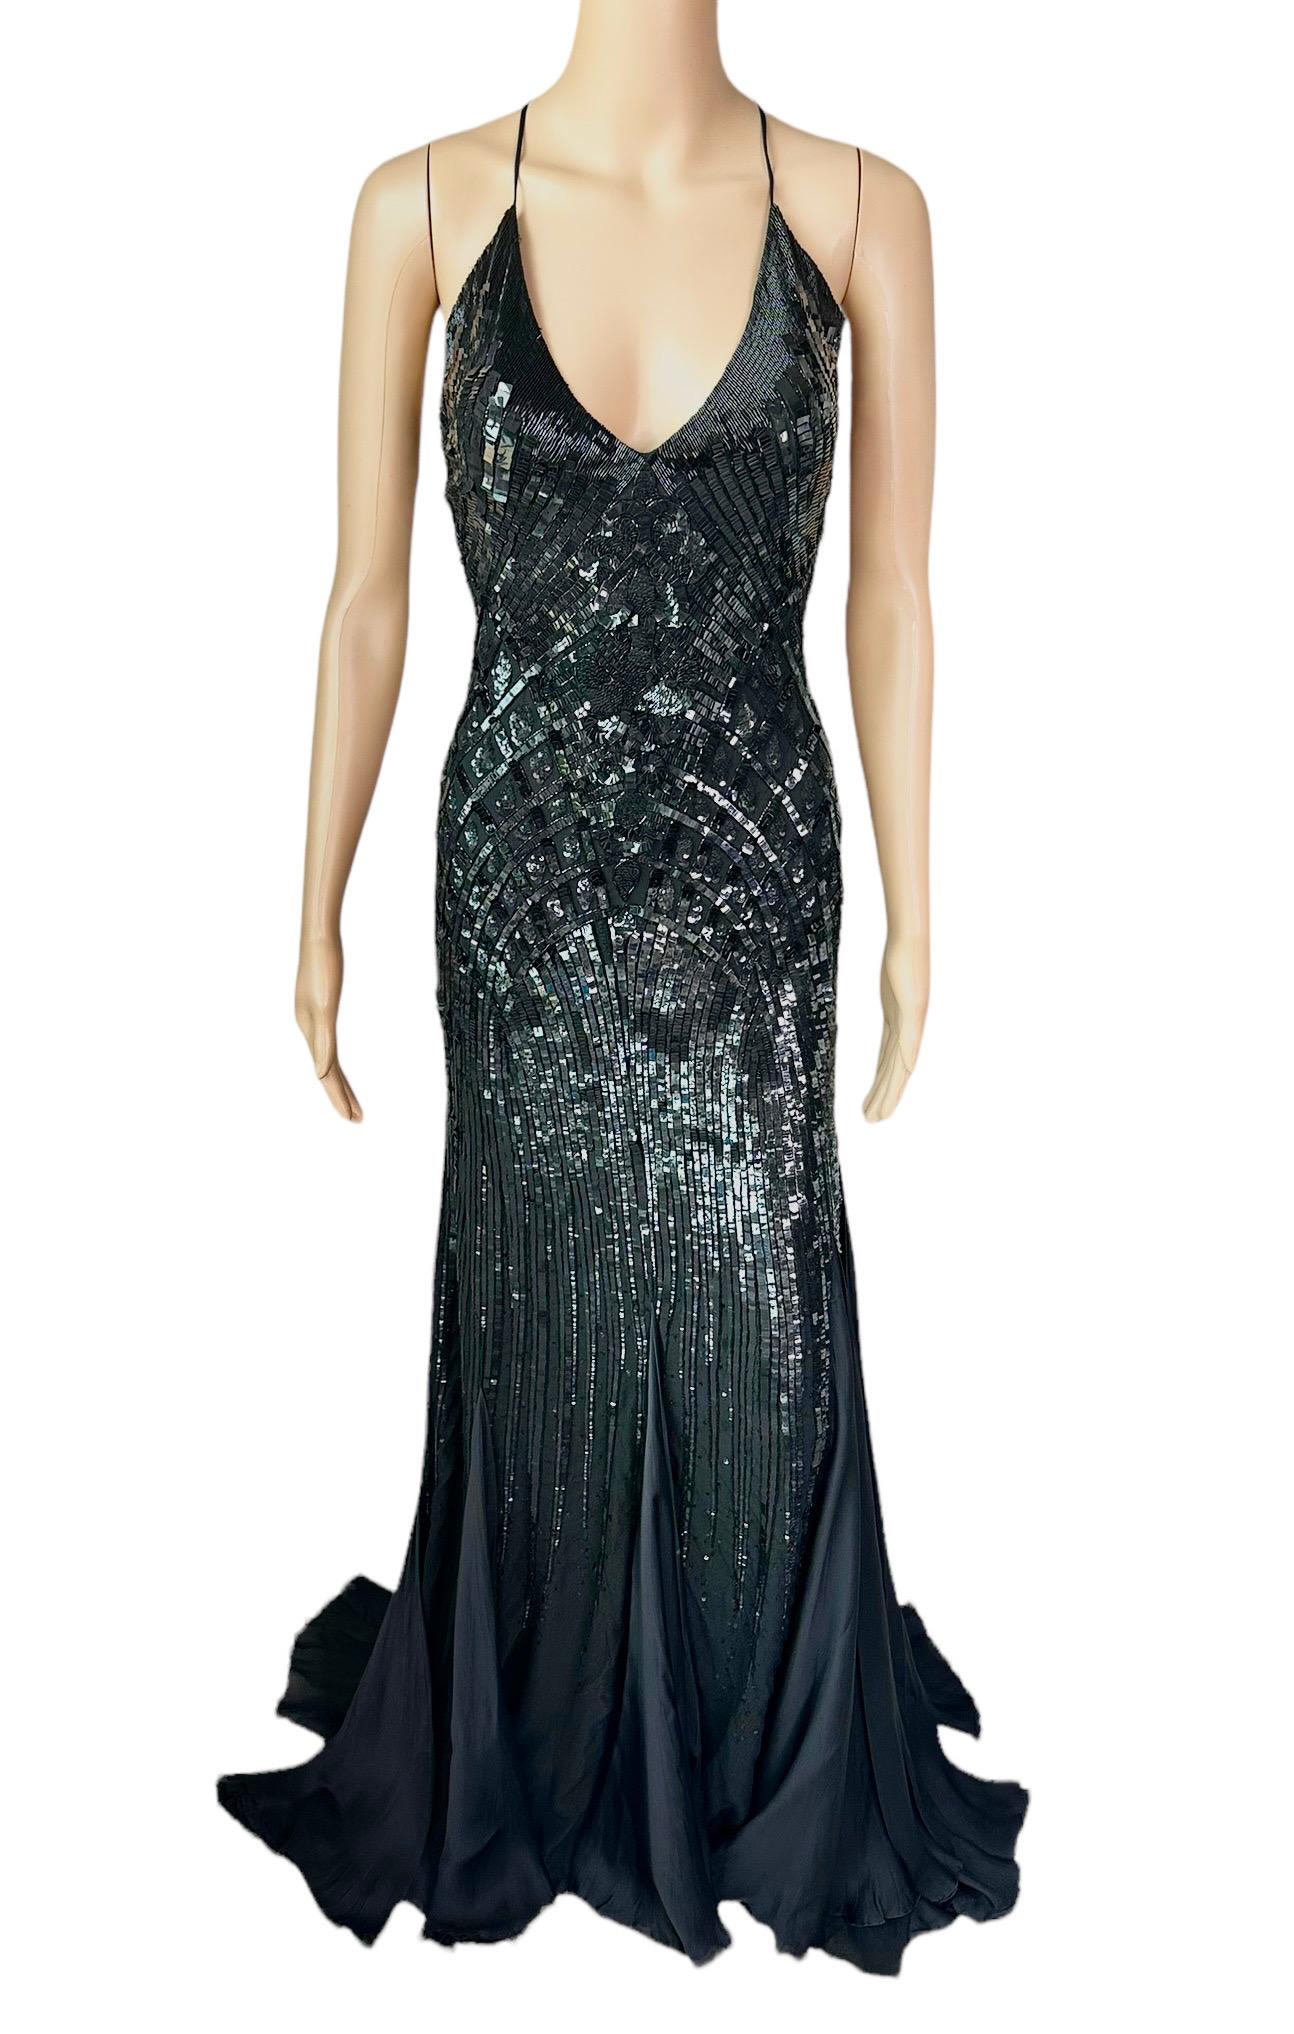 Roberto Cavalli S/S 2011 Embellished Plunged Lace Up Black Evening Dress Gown 5